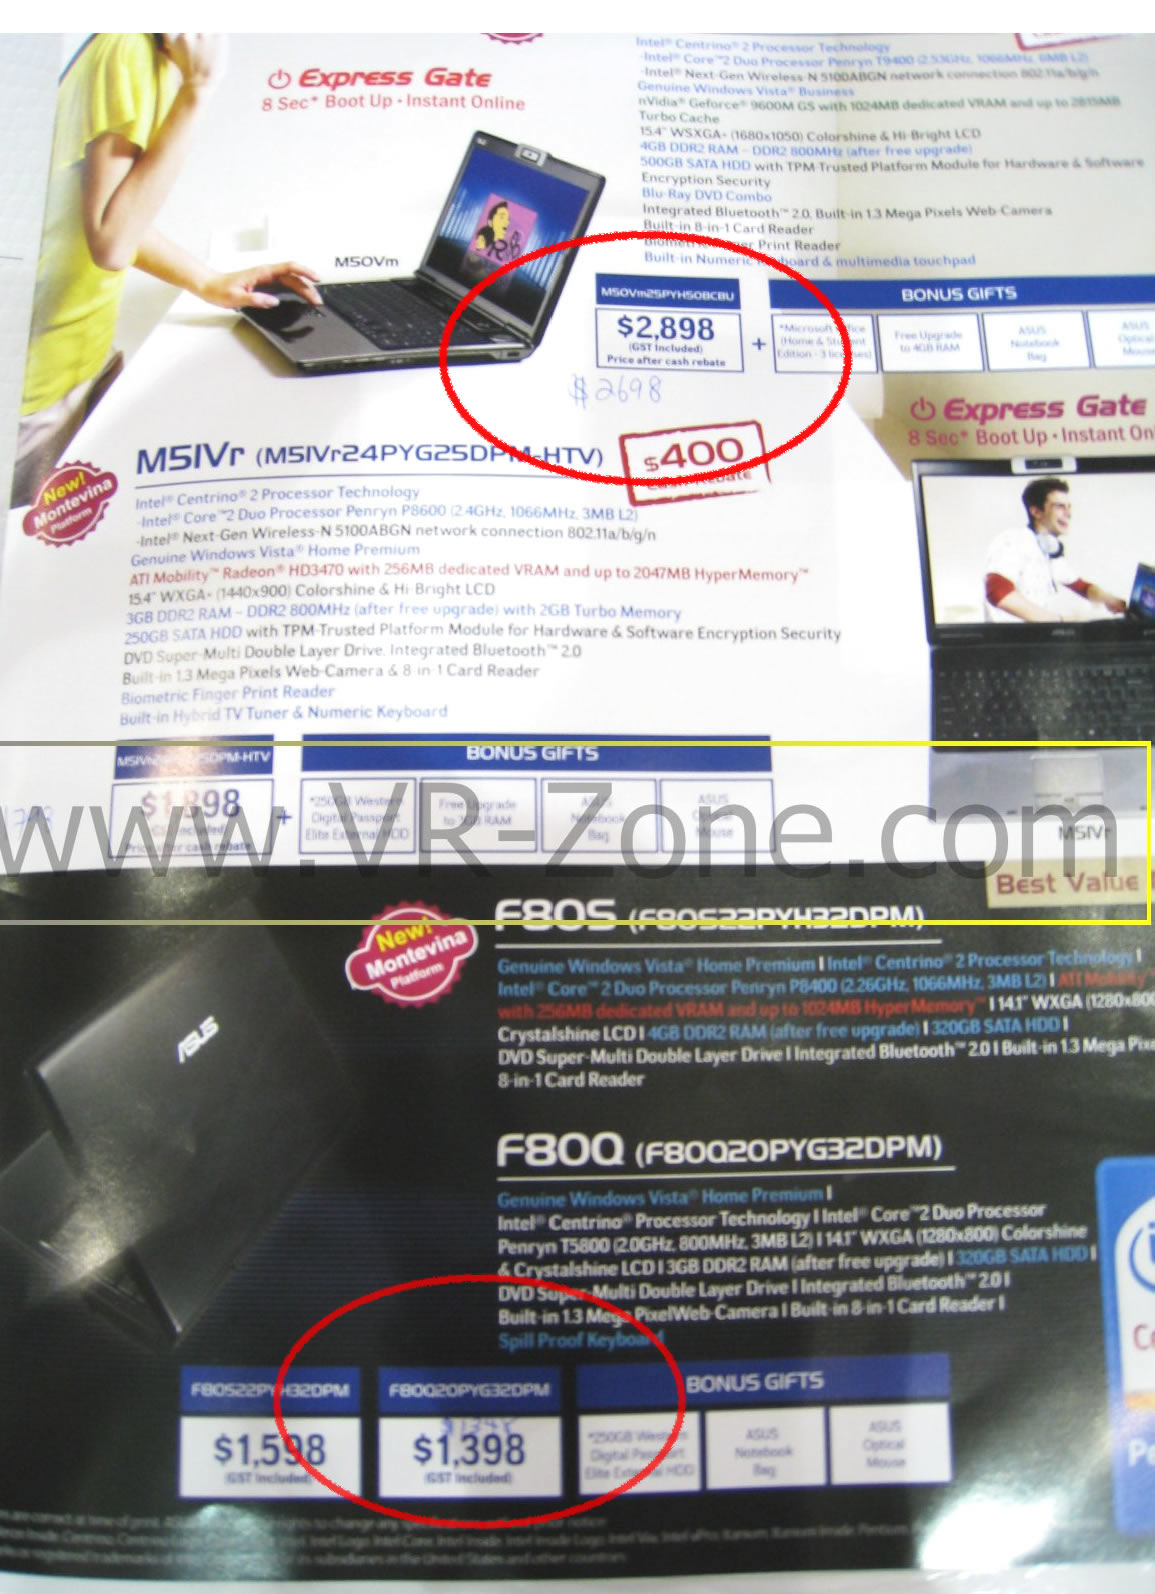 Sitex 2008 price list image brochure of (LAST DAY Deals) VR-Zone Asus F800 IMG 1715